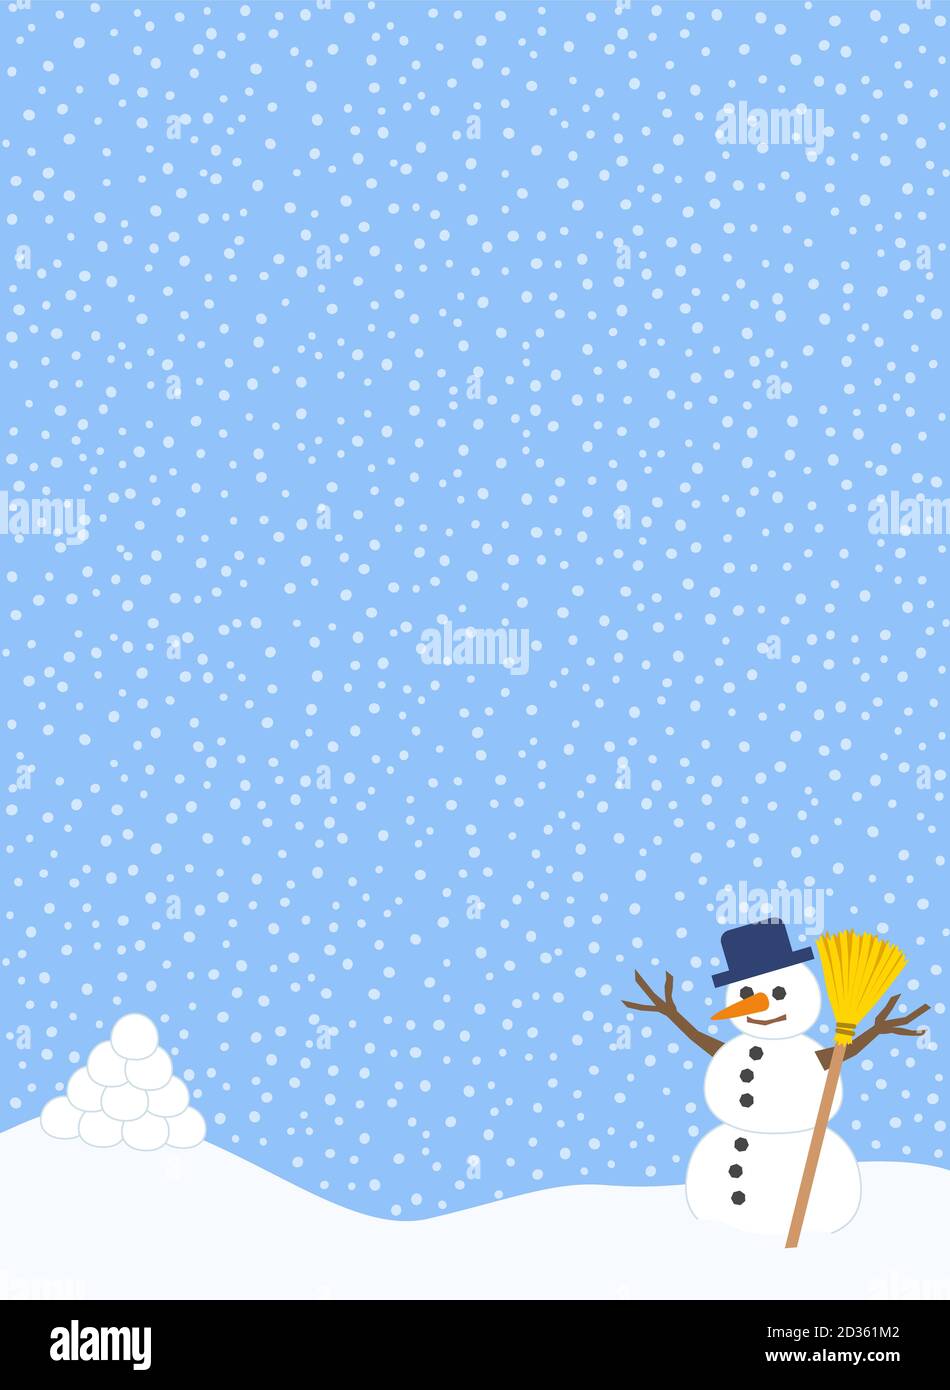 Winter fun anticipation with snowballs and snowman ready for upcoming snowball fight. Comic illustration on snowflakes background. Stock Photo